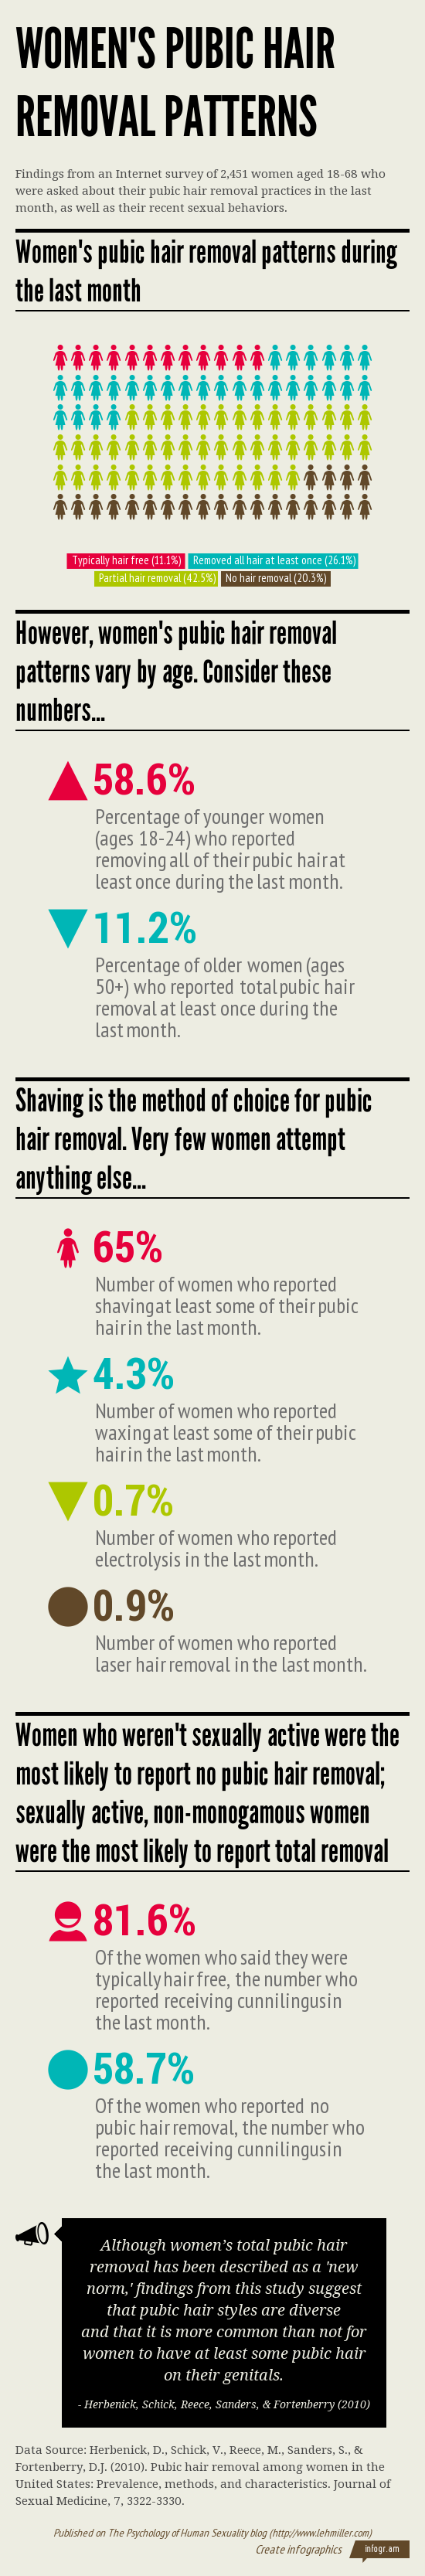 Infographic showing data on the frequency of women's pubic hair removal and methods used